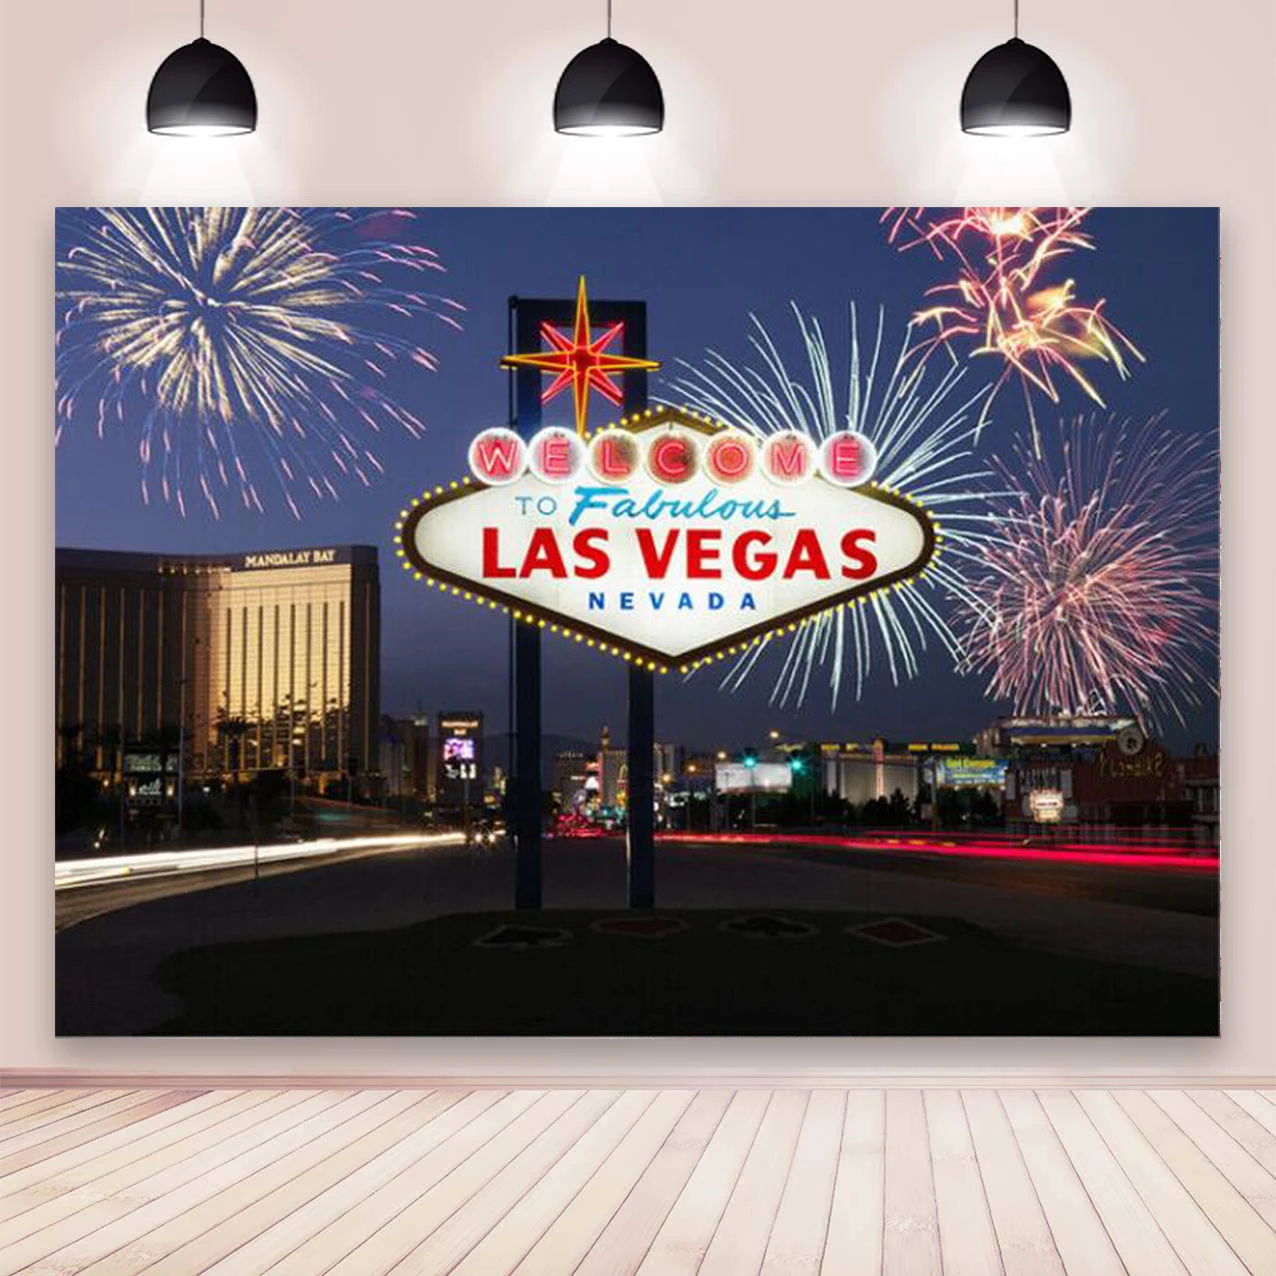 

Welcome to Las Vegas Backdrop City Billboard Banner Casino Night Scenery Party Photography Background For Photo Studio Prop